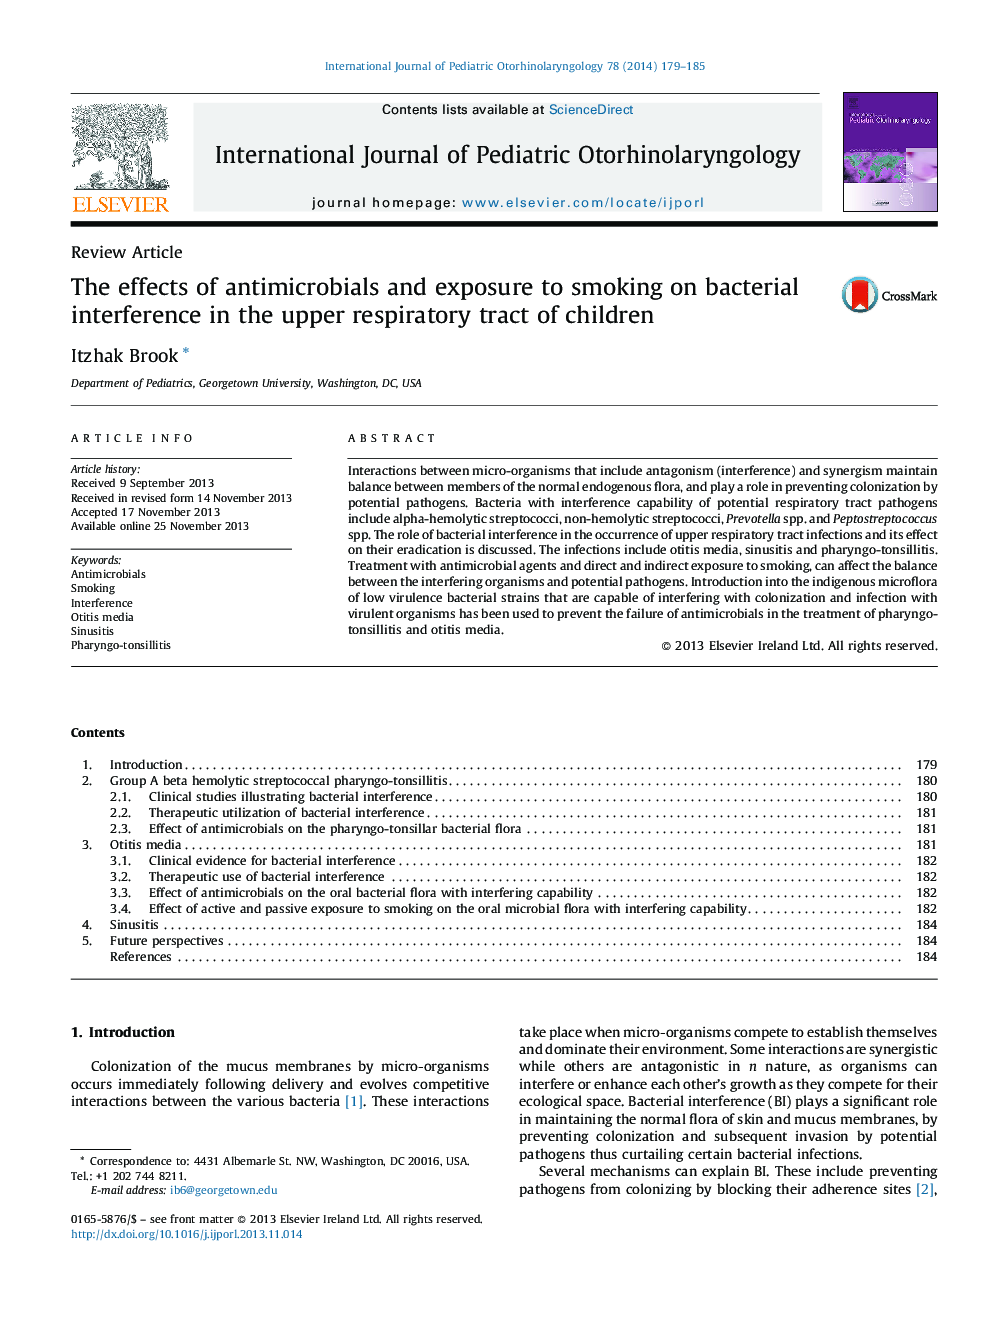 The effects of antimicrobials and exposure to smoking on bacterial interference in the upper respiratory tract of children